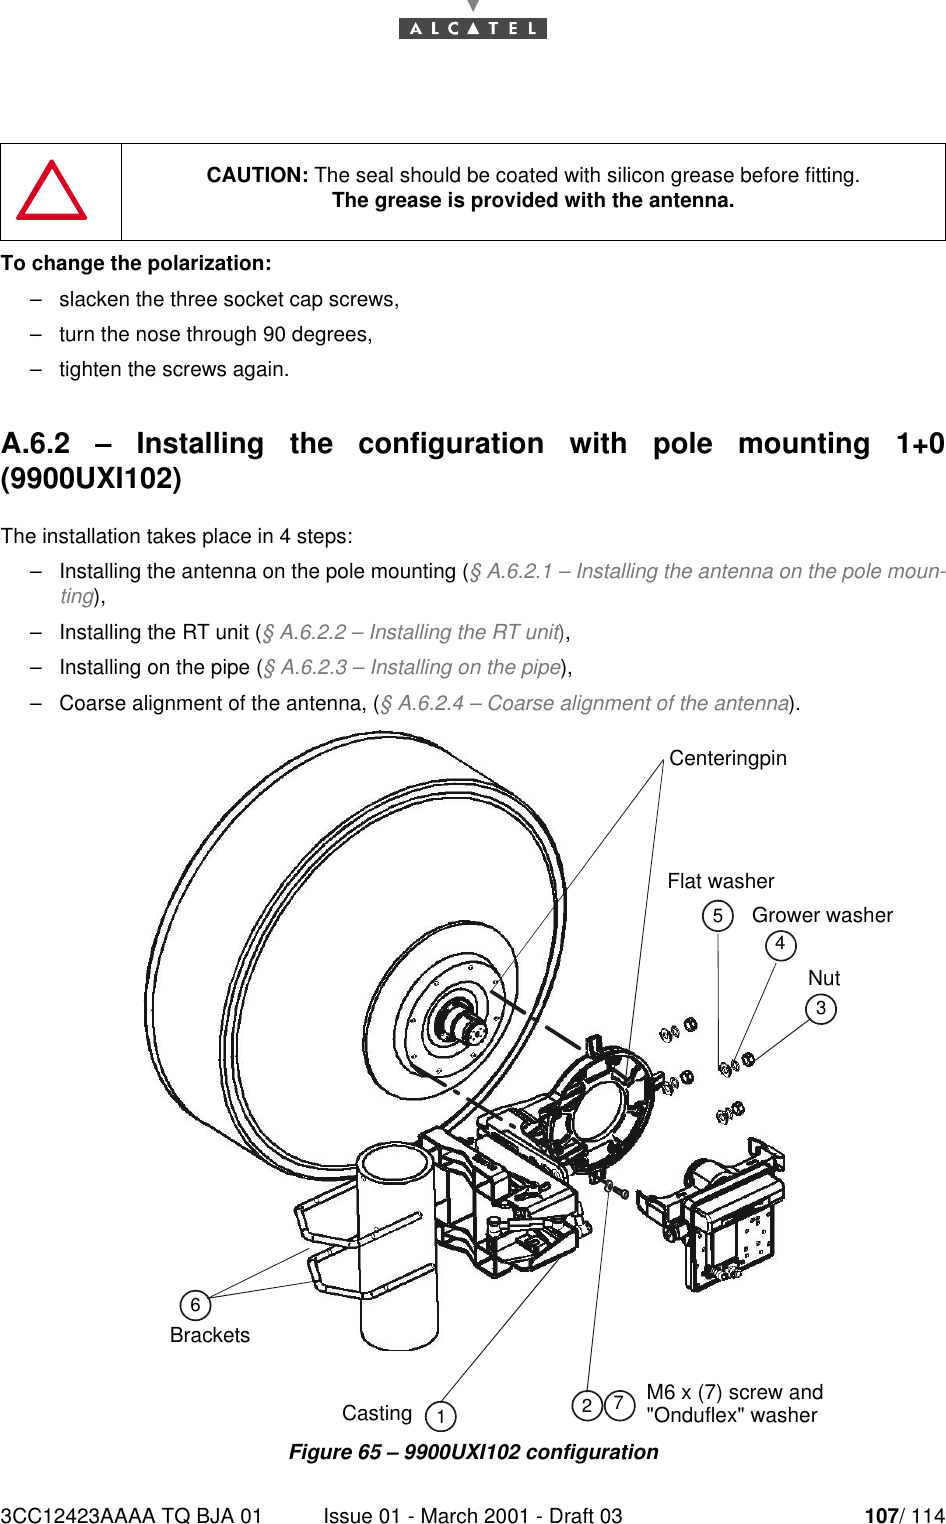 3CC12423AAAA TQ BJA 01 Issue 01 - March 2001 - Draft 03 107/ 114112 To change the polarization:–slacken the three socket cap screws,–turn the nose through 90 degrees,–tighten the screws again.A.6.2  – Installing the configuration with pole mounting 1+0(9900UXI102)The installation takes place in 4 steps:–Installing the antenna on the pole mounting (§ A.6.2.1 – Installing the antenna on the pole moun-ting),–Installing the RT unit (§ A.6.2.2 – Installing the RT unit),–Installing on the pipe (§ A.6.2.3 – Installing on the pipe),–Coarse alignment of the antenna, (§ A.6.2.4 – Coarse alignment of the antenna).Figure 65 – 9900UXI102 configurationCAUTION: The seal should be coated with silicon grease before fitting.The grease is provided with the antenna.CenteringpinFlat washerGrower washerNutBracketsCasting M6 x (7) screw and5634271&quot;Onduflex&quot; washer